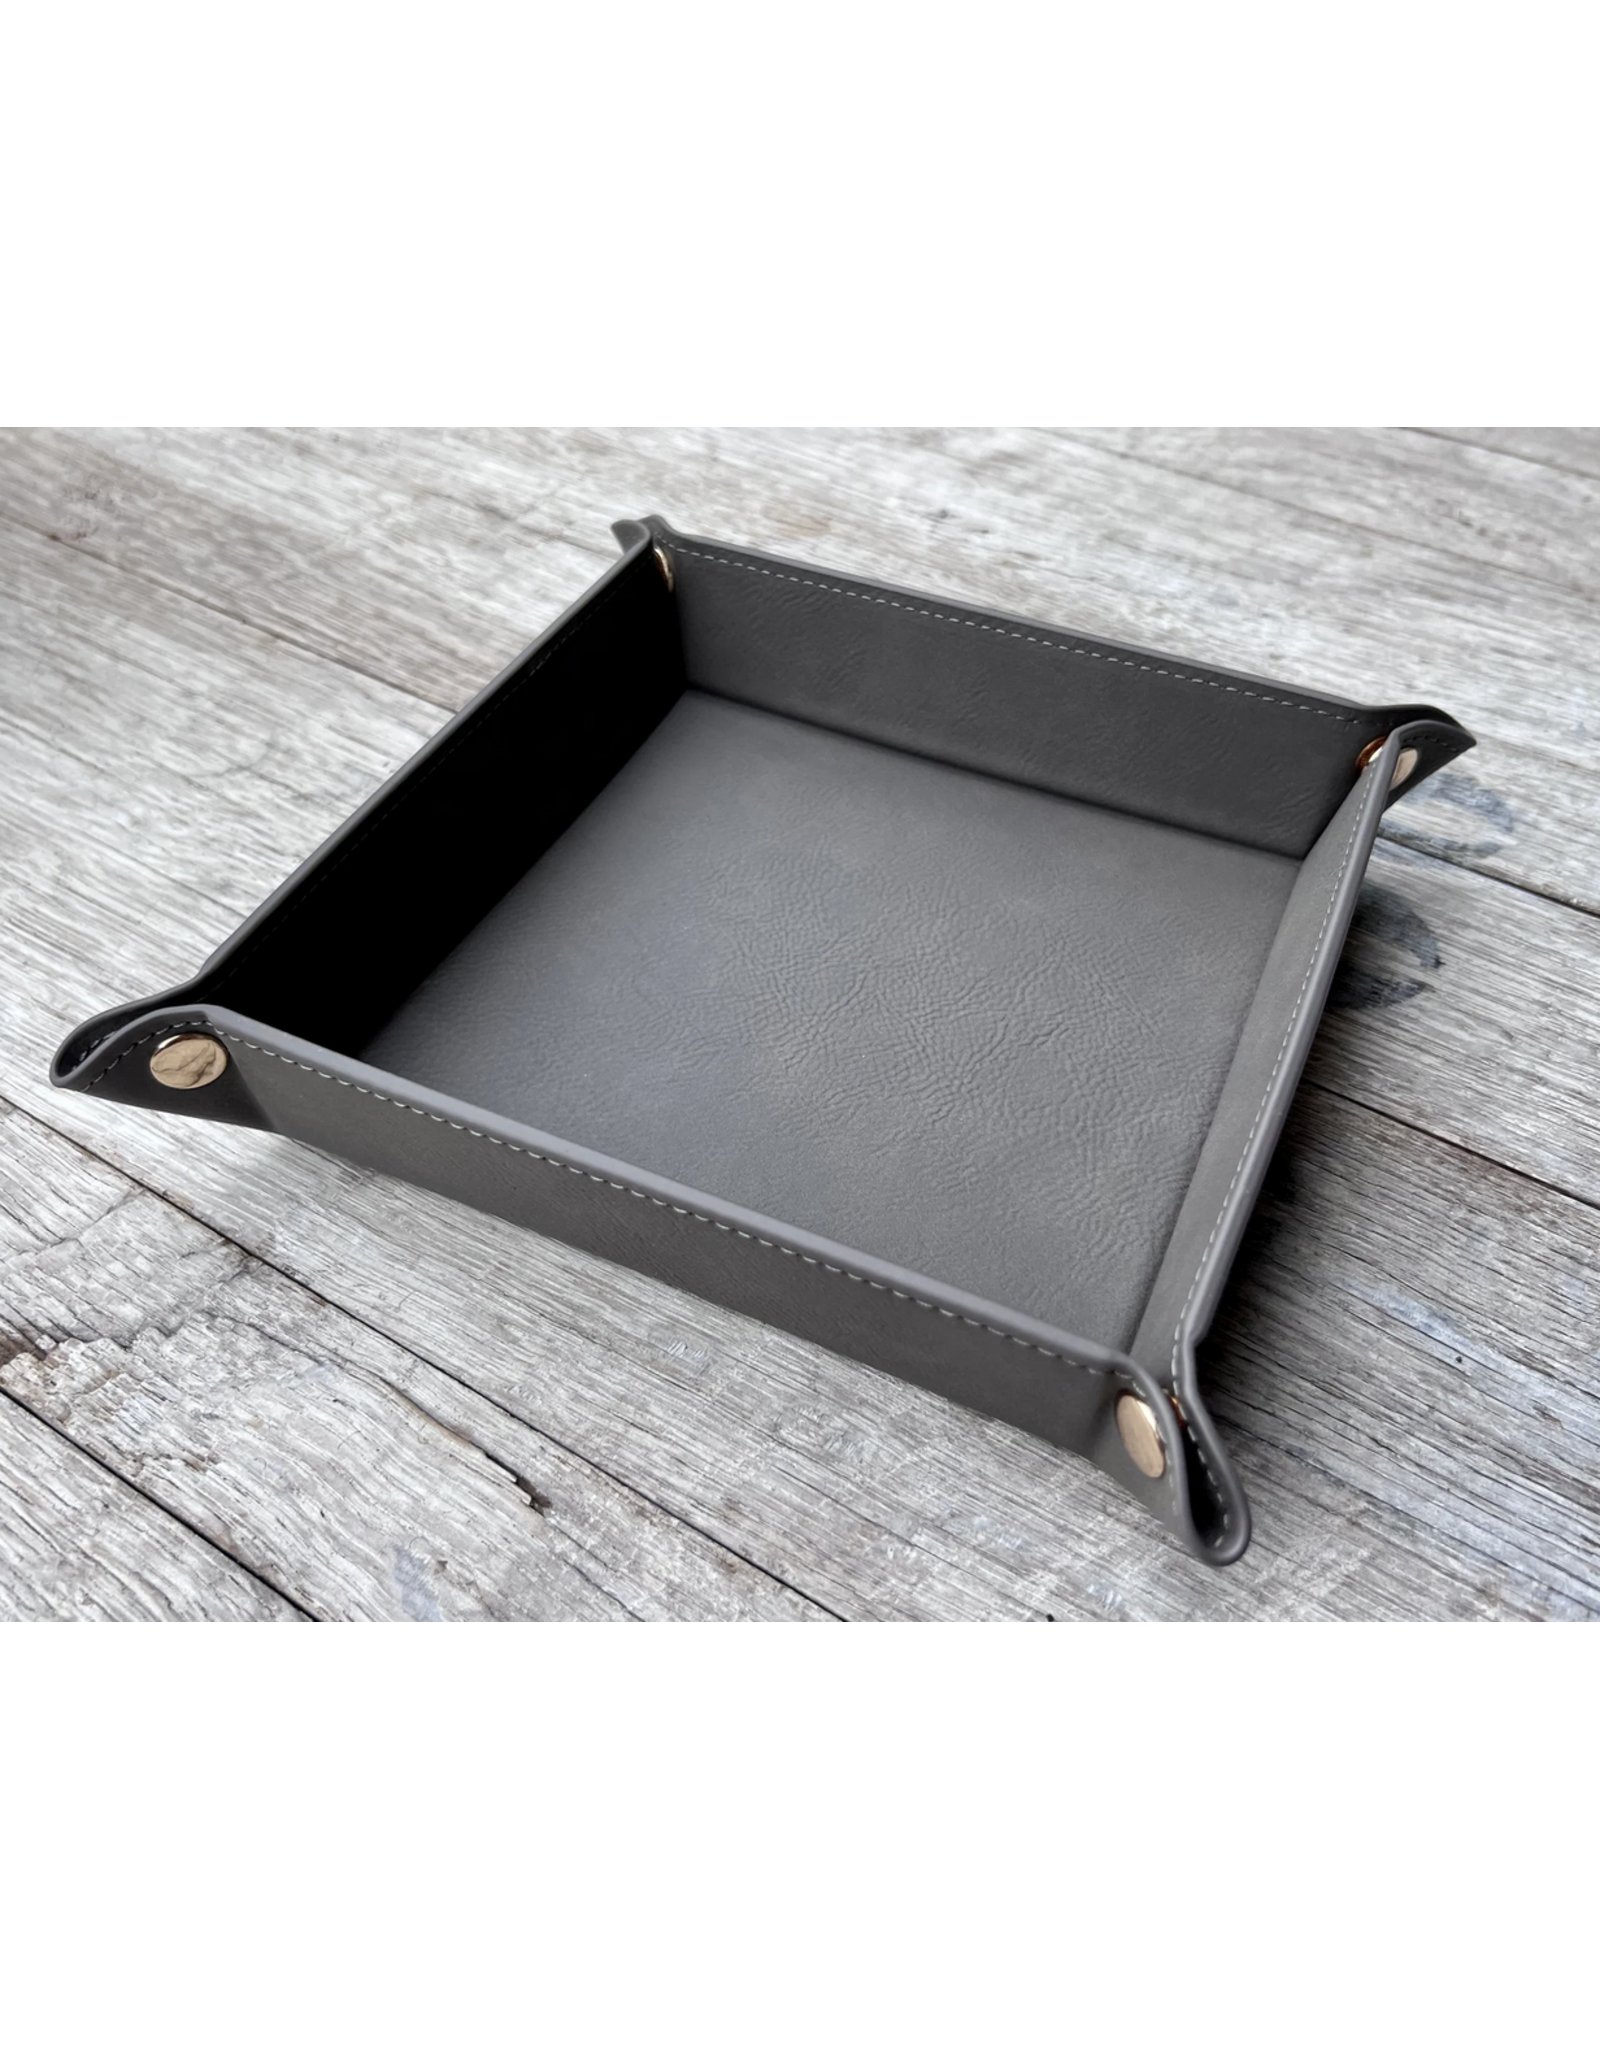 KW Custom Creations 2 Leather Valet Tray (includes engraving)